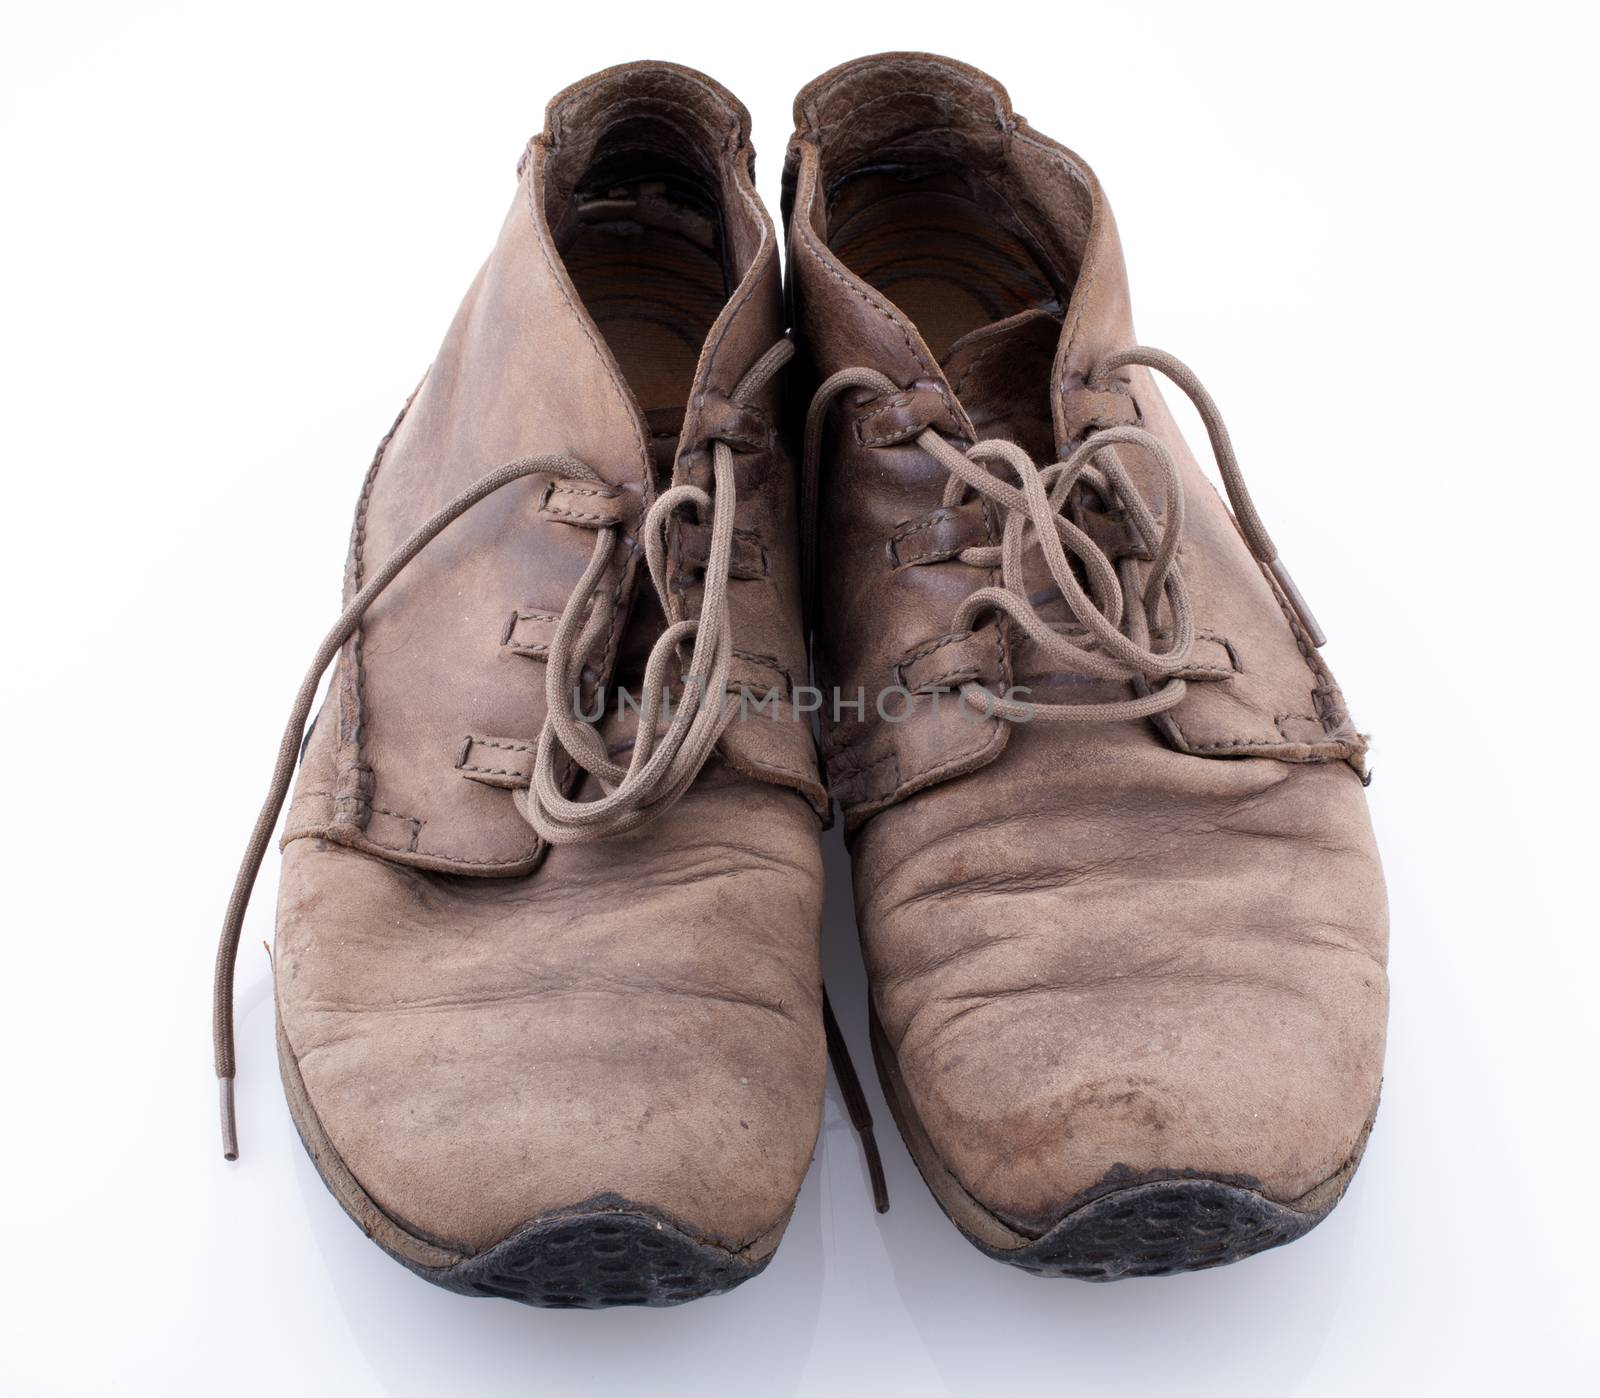 Pair of old leather boots isolated on the white background